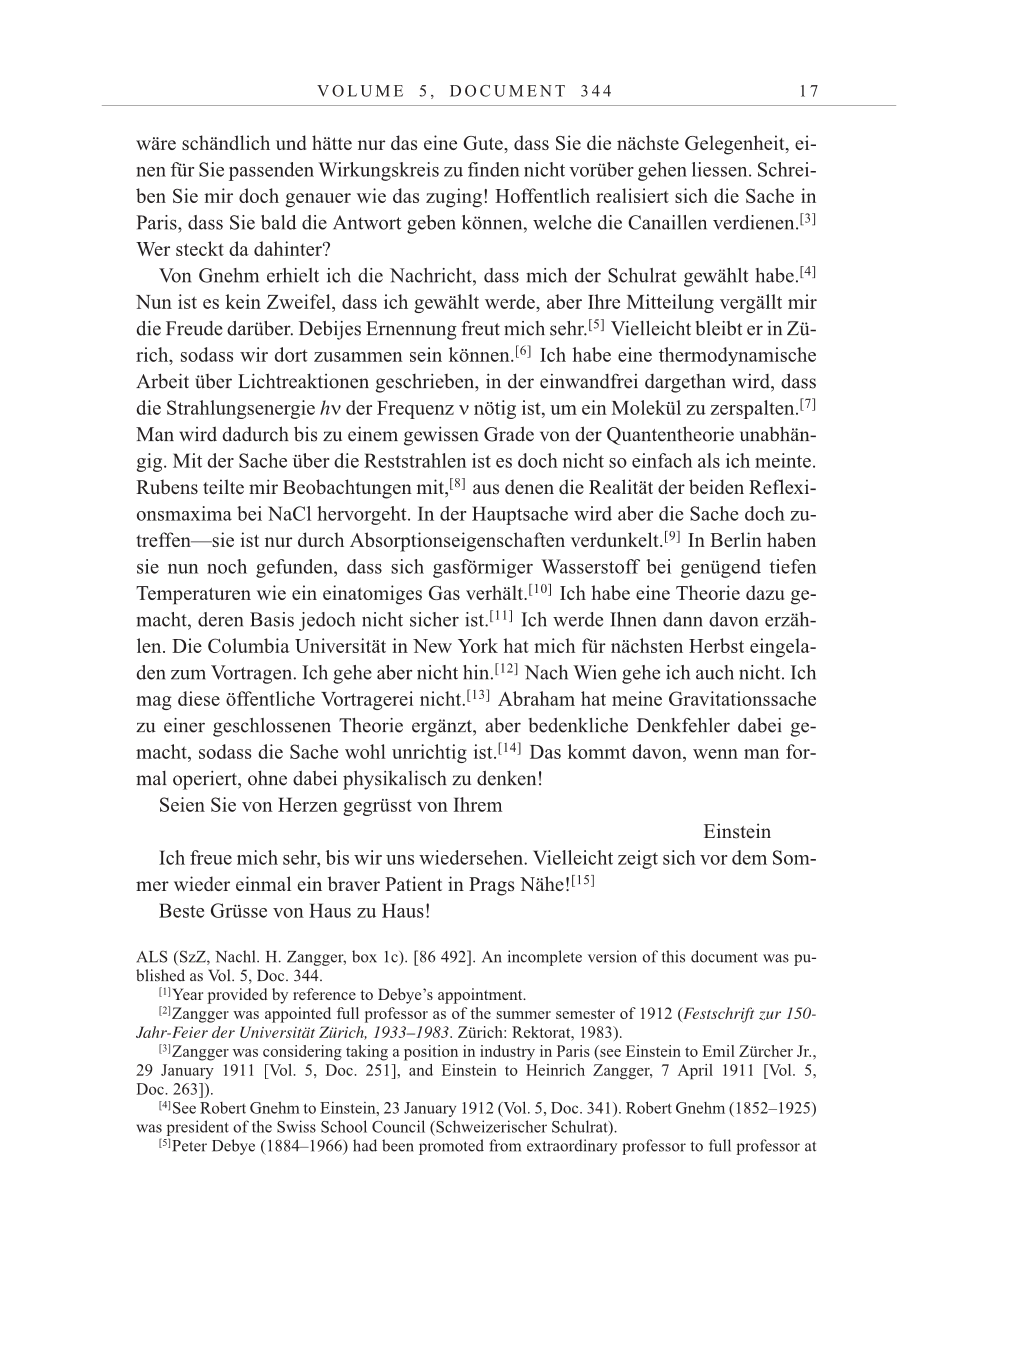 Volume 10: The Berlin Years: Correspondence May-December 1920 / Supplementary Correspondence 1909-1920 page 17